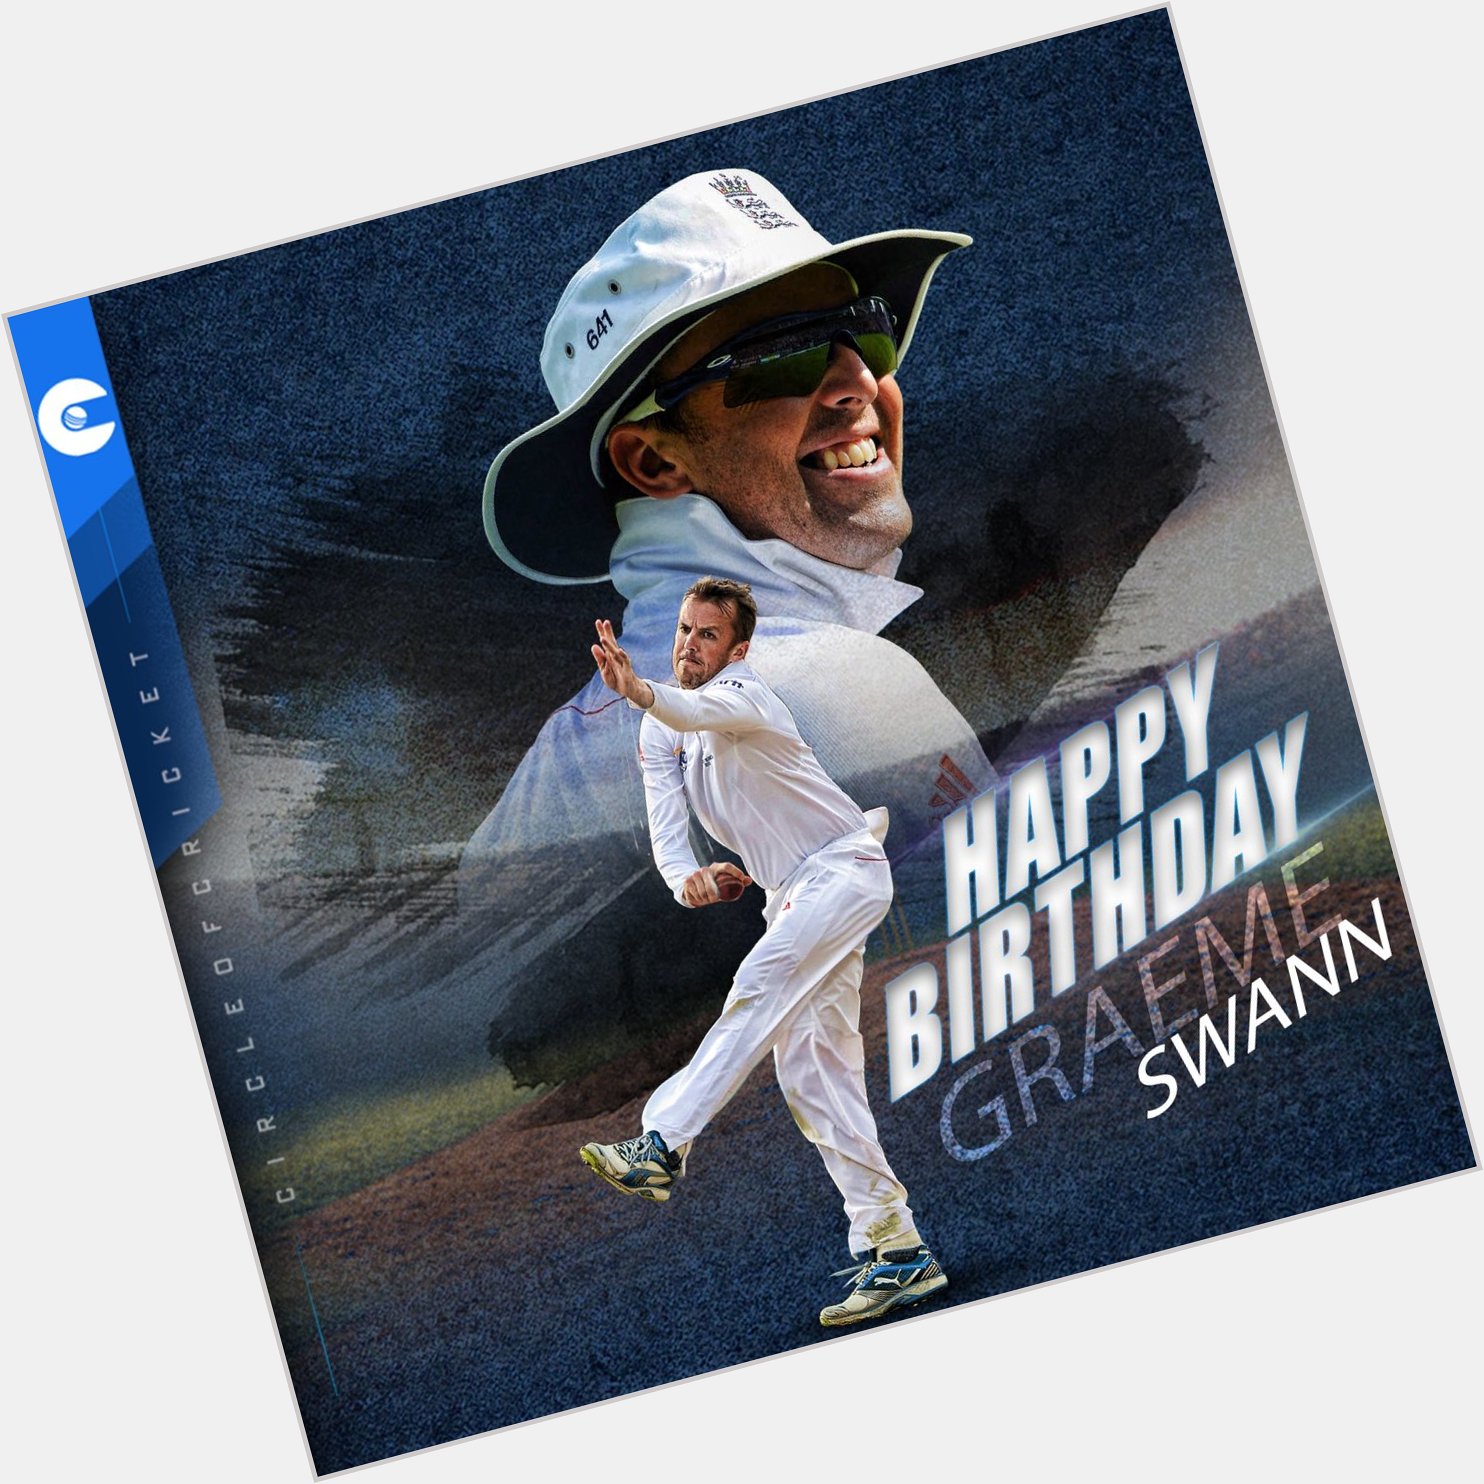 One of England\s most successful spinners in Test cricket with 255 wickets 
Happy Birthday, Graeme Swann 